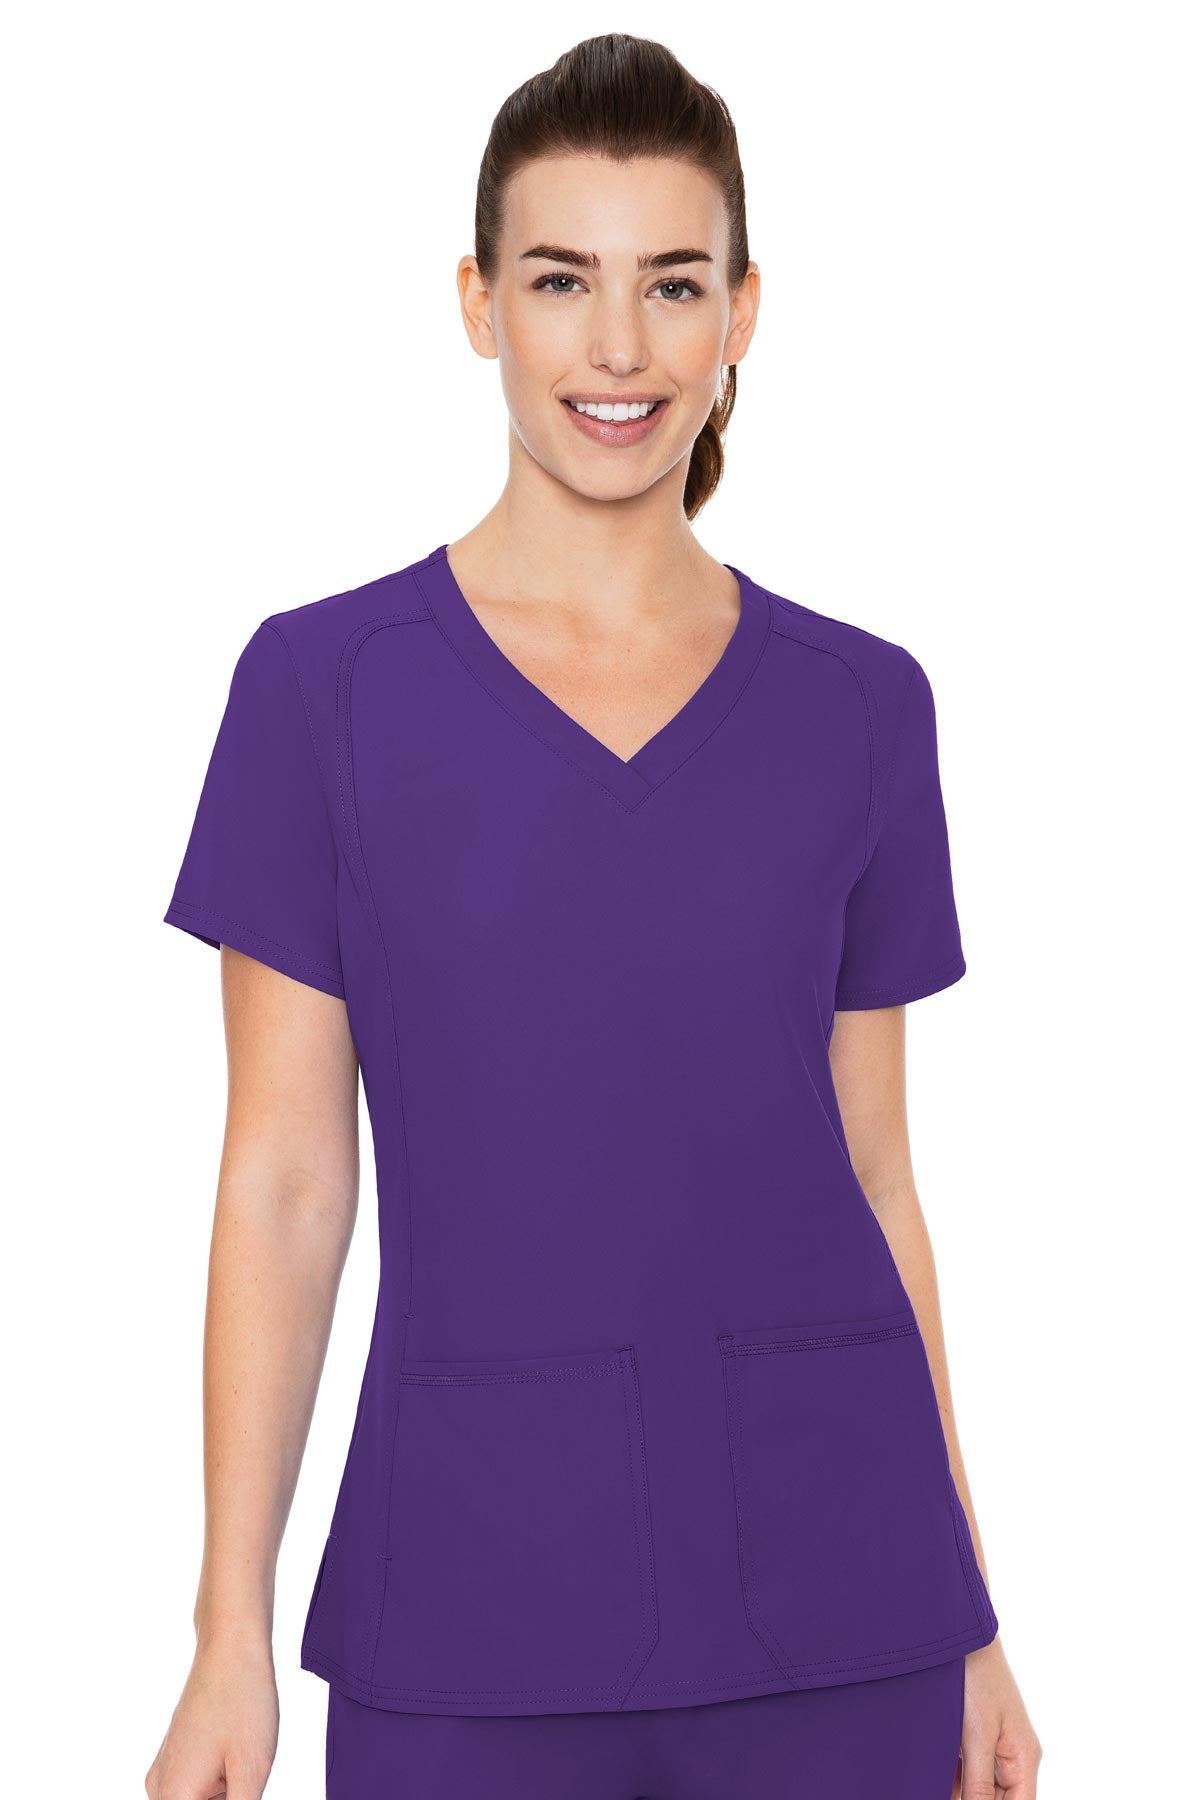 Med Couture Grape TOP